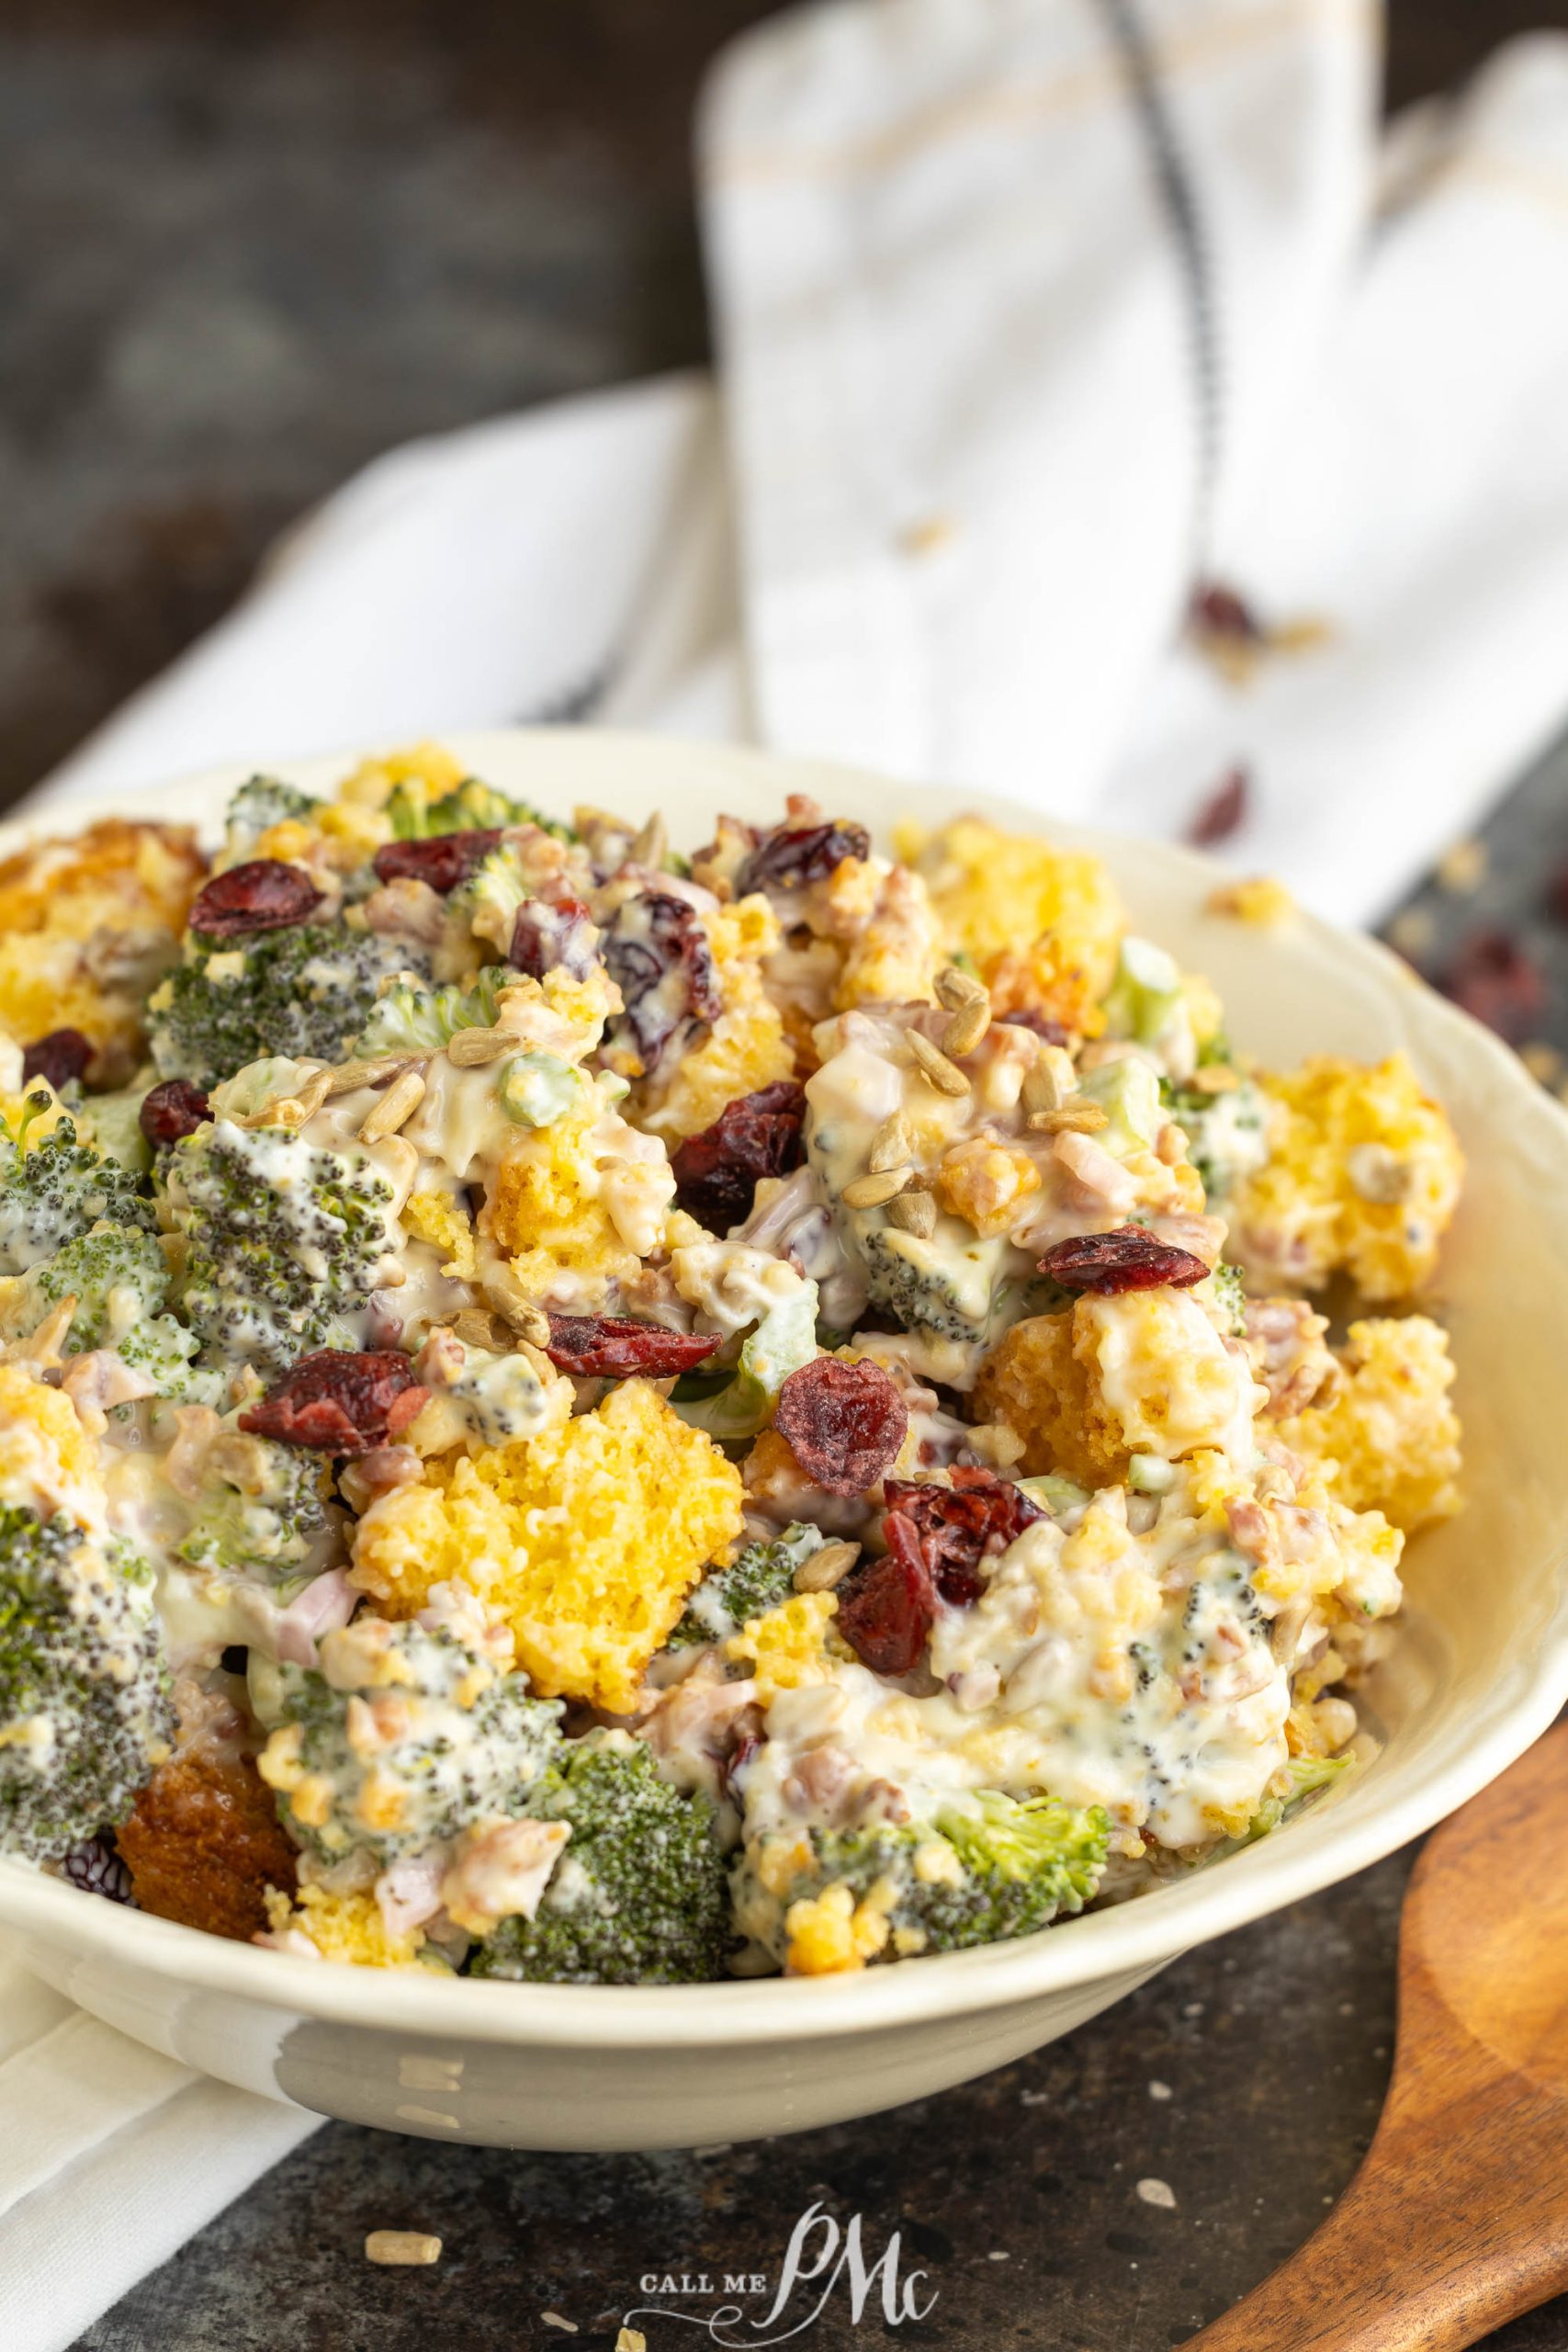 A bowl of broccoli and cauliflower salad with dried cranberries and a creamy dressing, served on a rustic table.